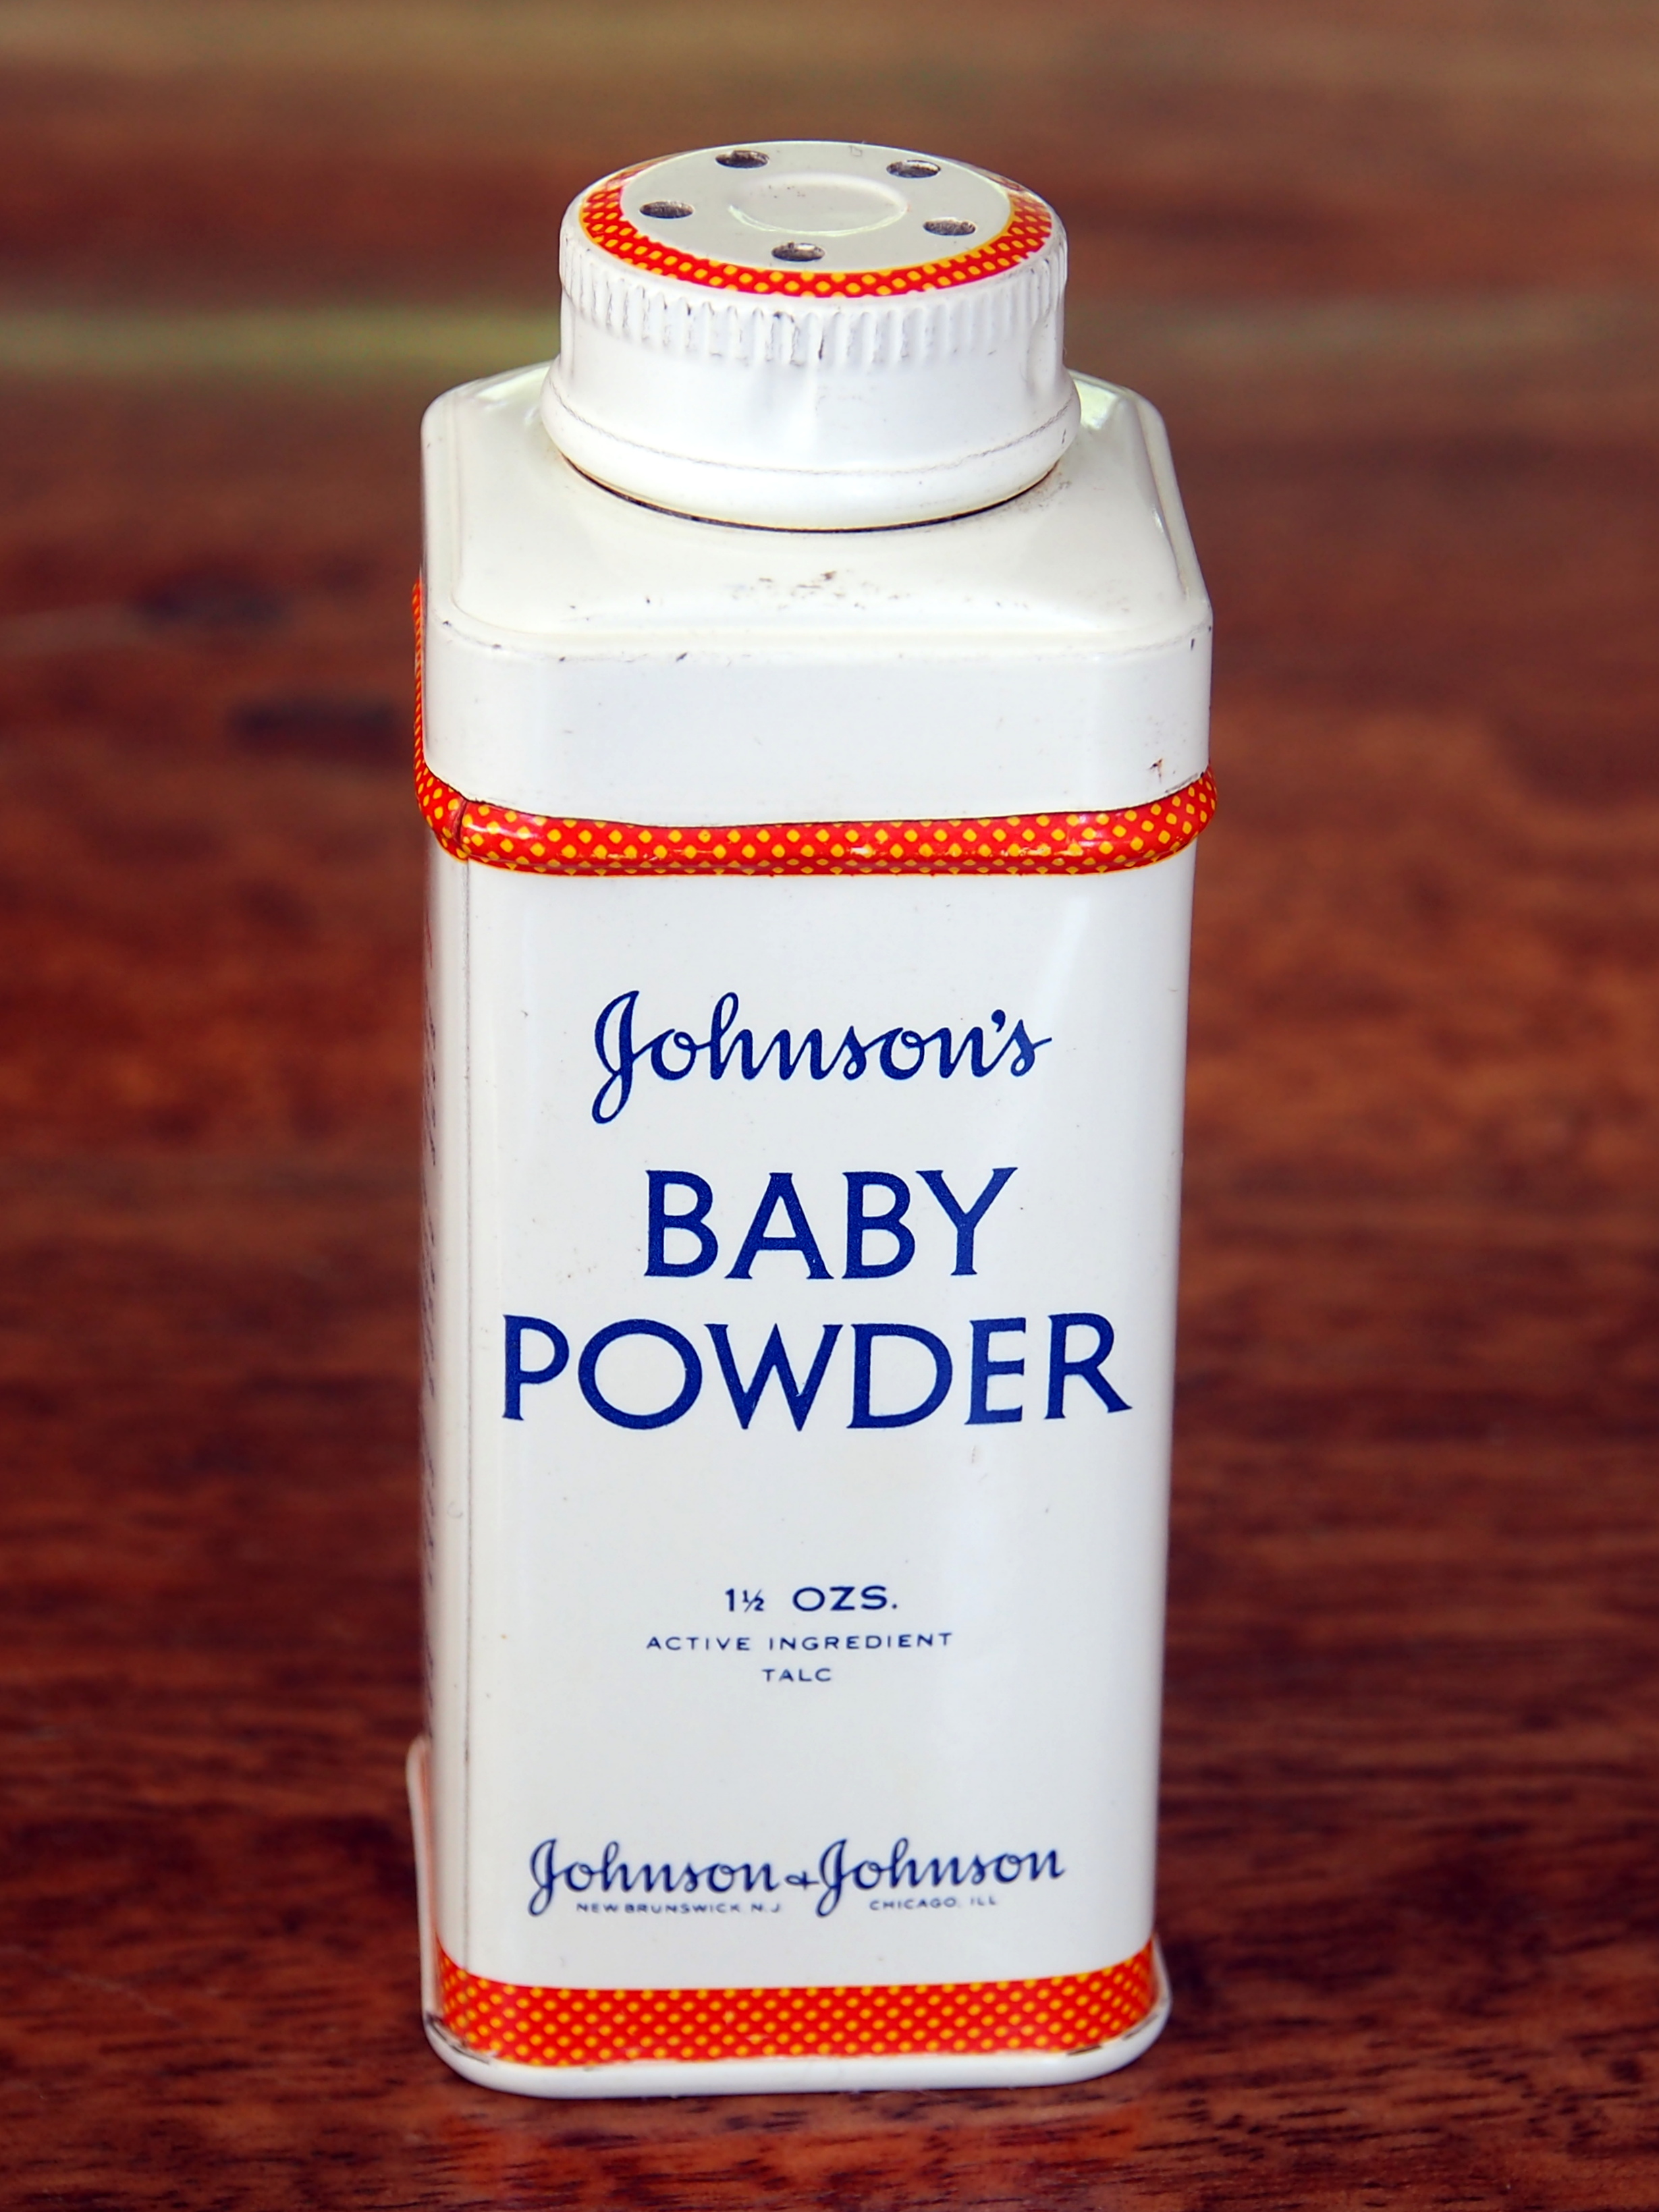 What Products Contain Talc?